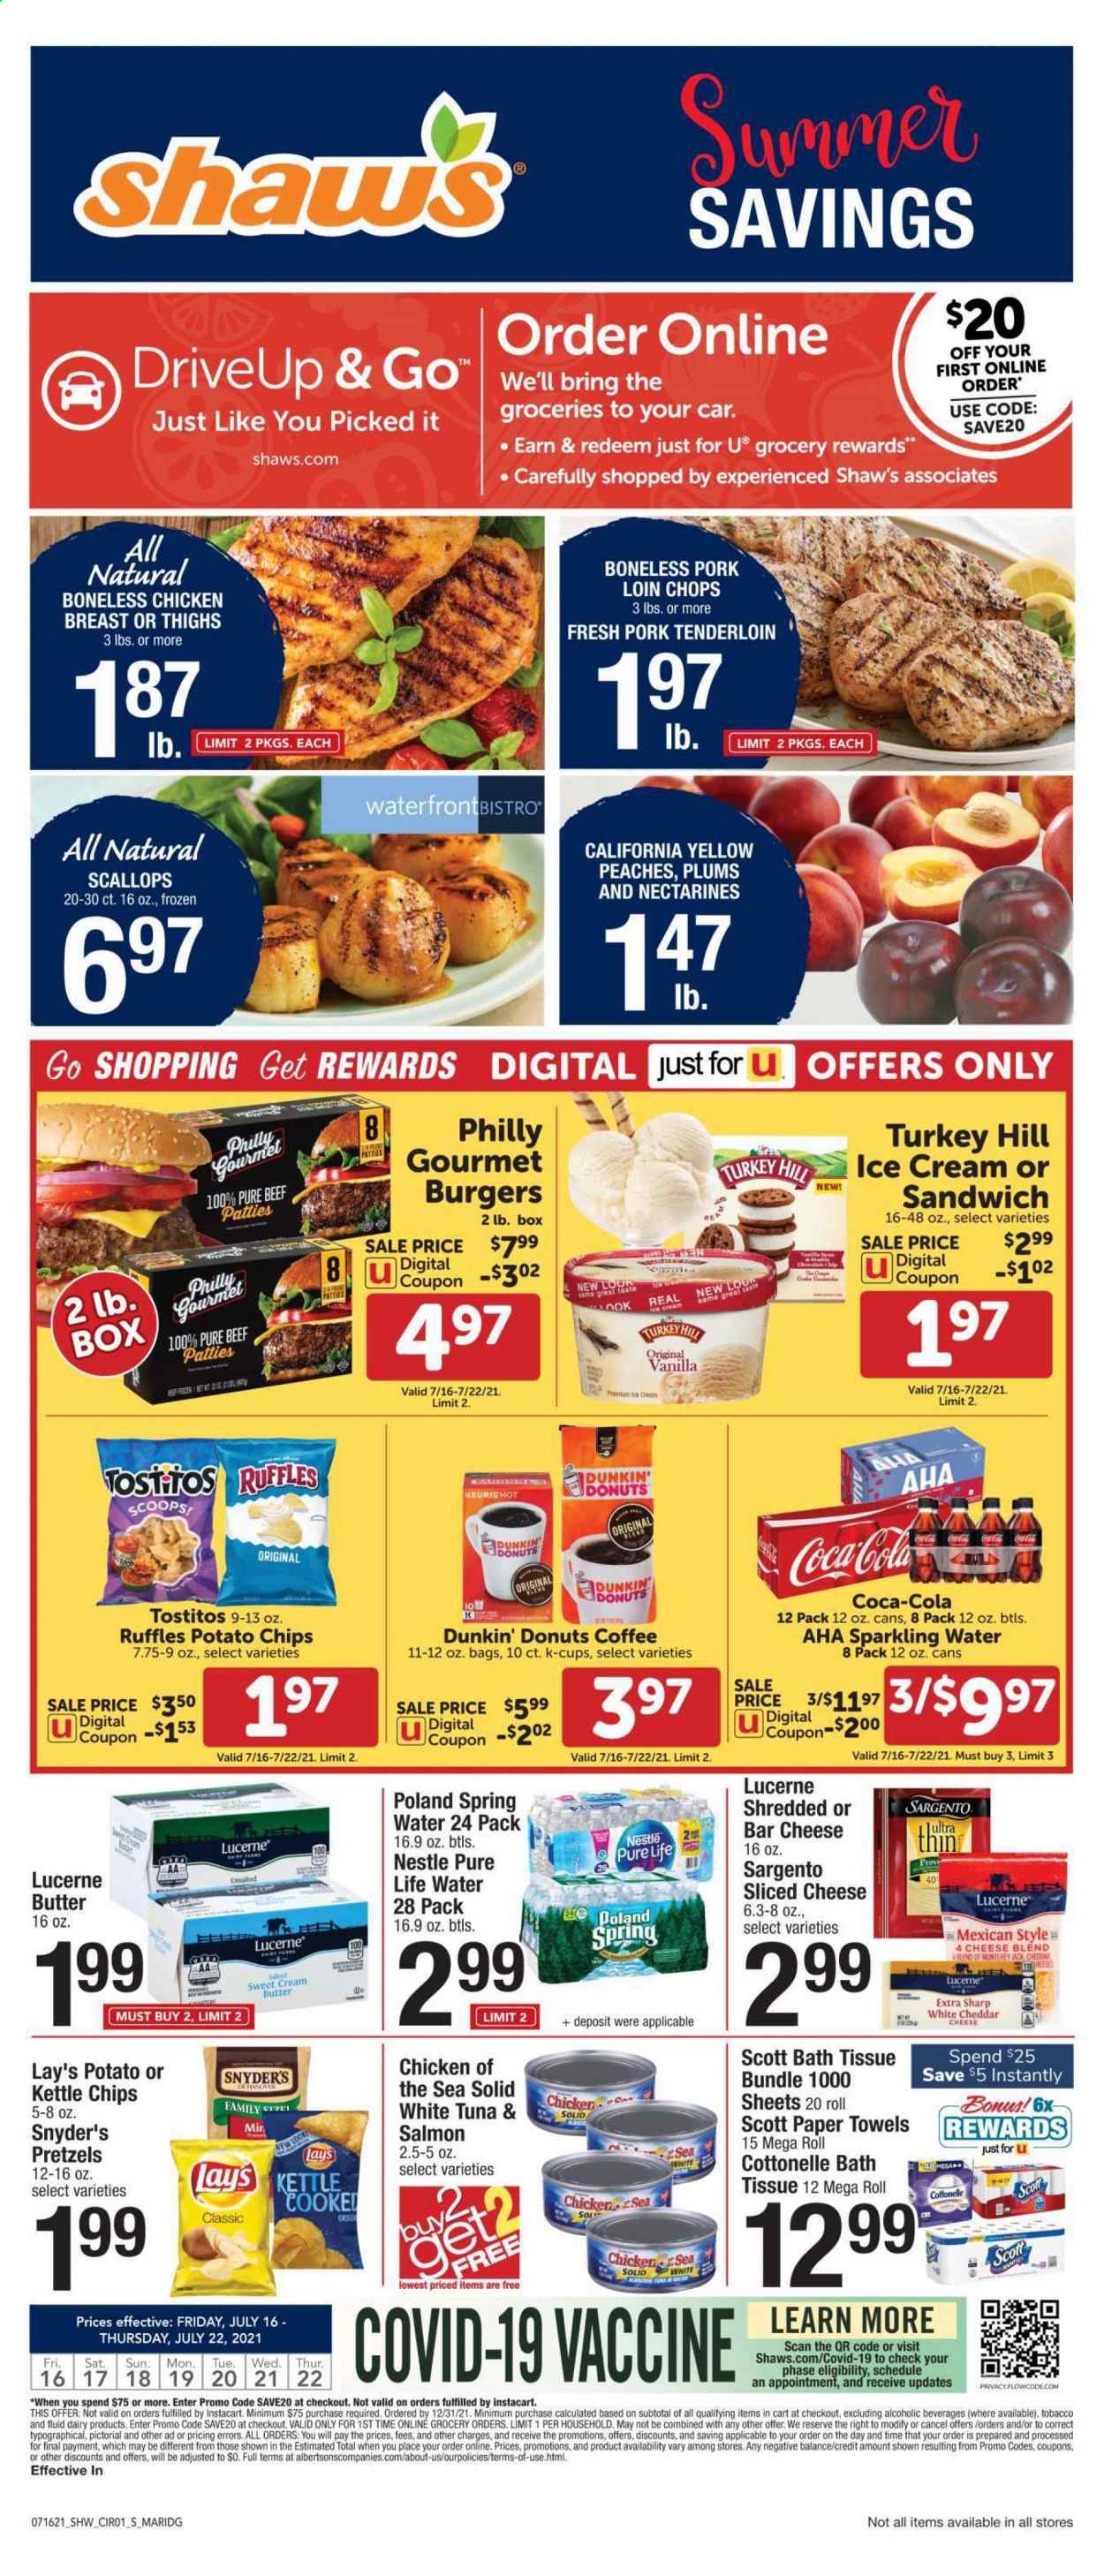 thumbnail - Shaw’s Flyer - 07/16/2021 - 07/22/2021 - Sales products - plums, pretzels, Dunkin' Donuts, salmon, scallops, tuna, sandwich, hamburger, Monterey Jack cheese, sliced cheese, cheese, Sargento, butter, ice cream, Nestlé, potato chips, Lay’s, Ruffles, Tostitos, Chicken of the Sea, Coca-Cola, spring water, sparkling water, Pure Life Water, coffee, coffee capsules, K-Cups, chicken breasts, pork chops, pork loin, pork meat, pork tenderloin, bath tissue, Cottonelle, Scott, kitchen towels, paper towels, nectarines, peaches. Page 1.